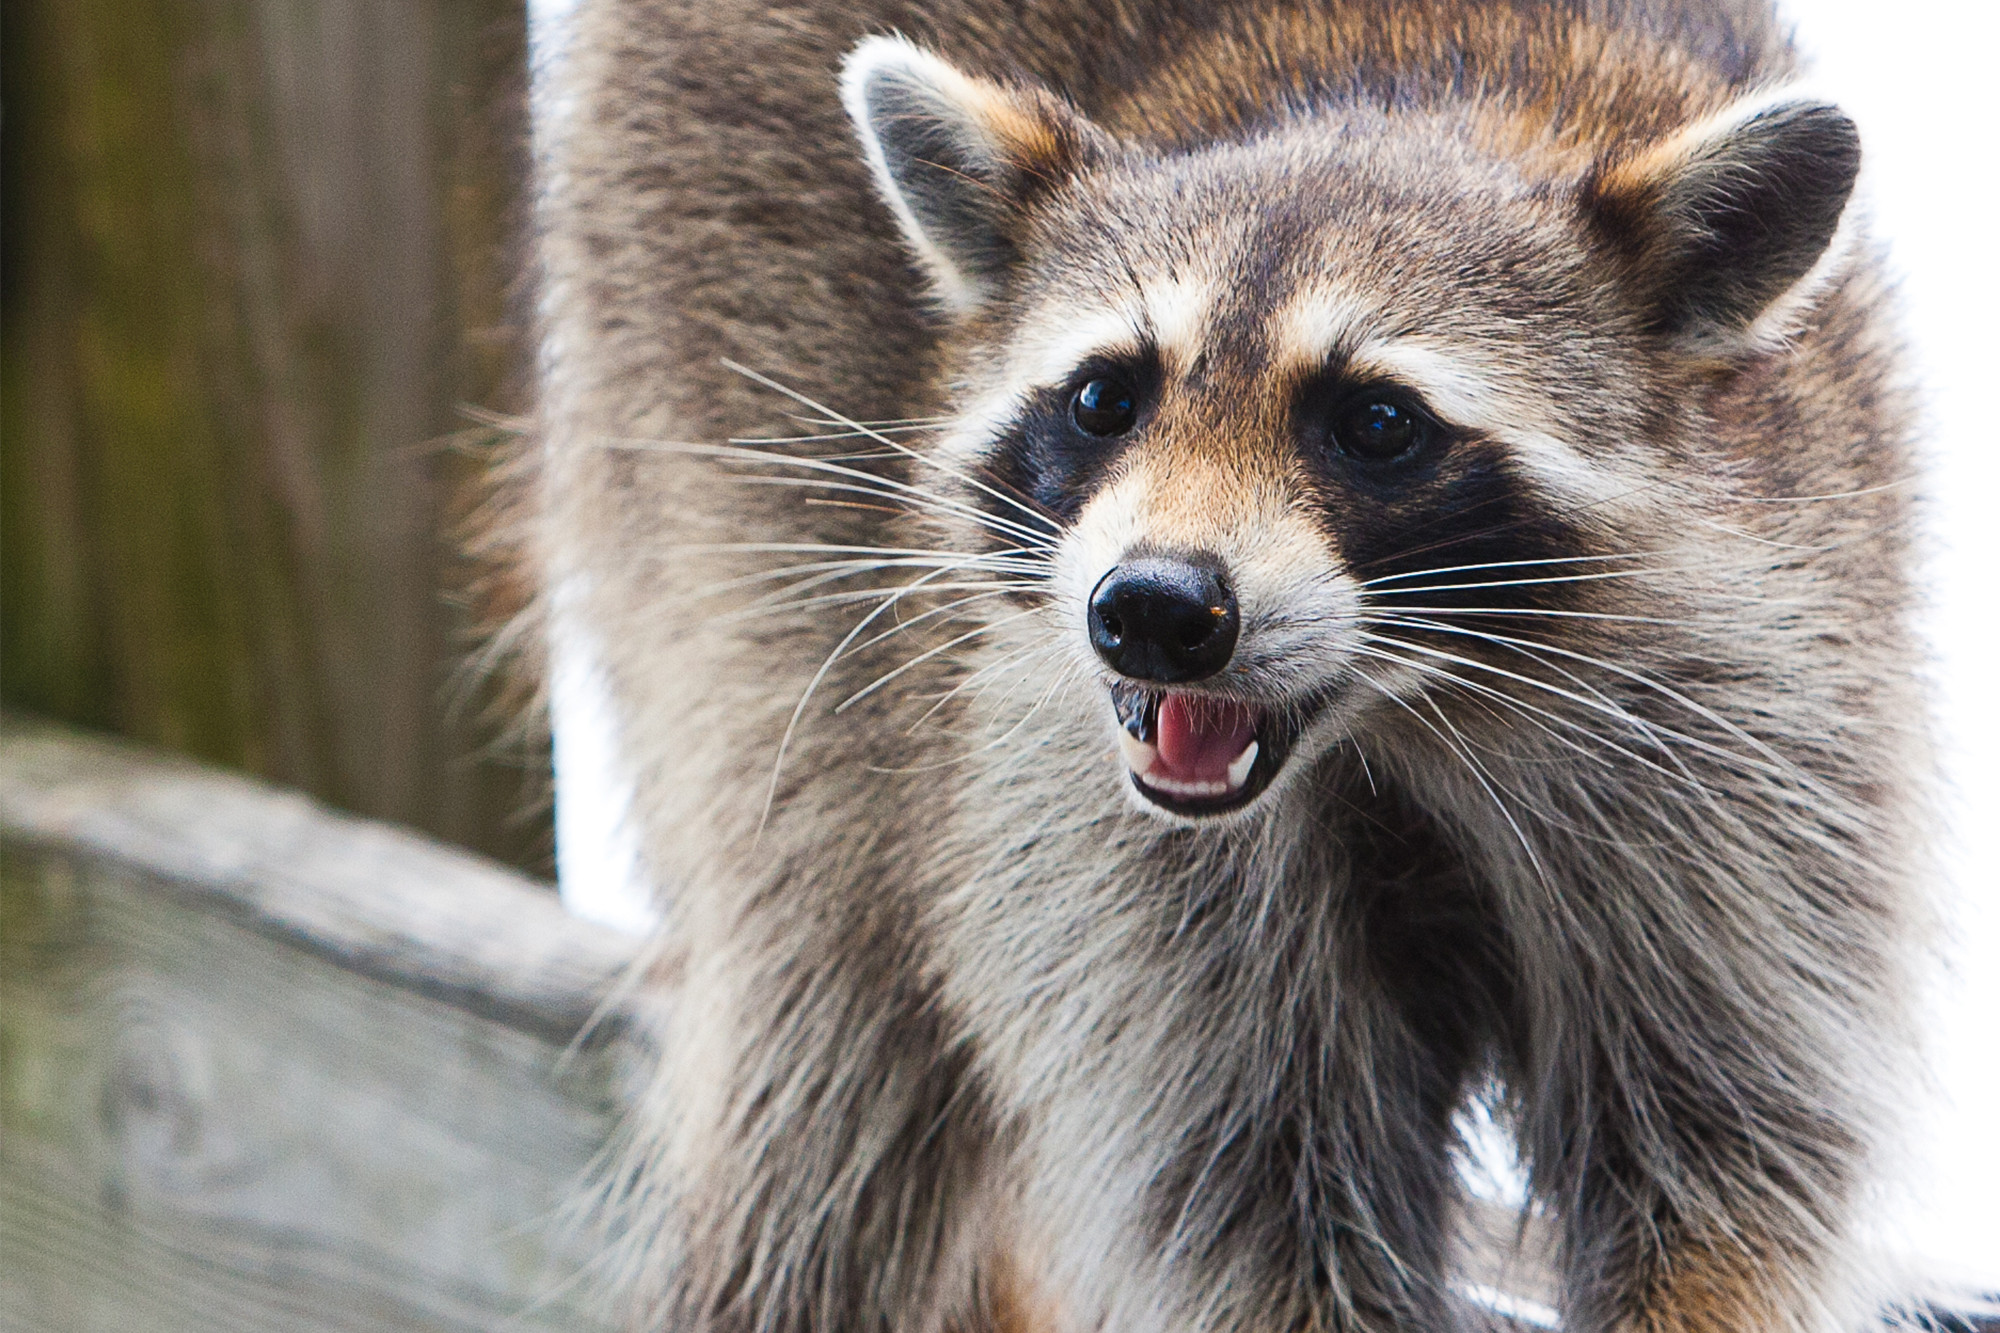 Raccoon mauls 4-month-old asleep in her home